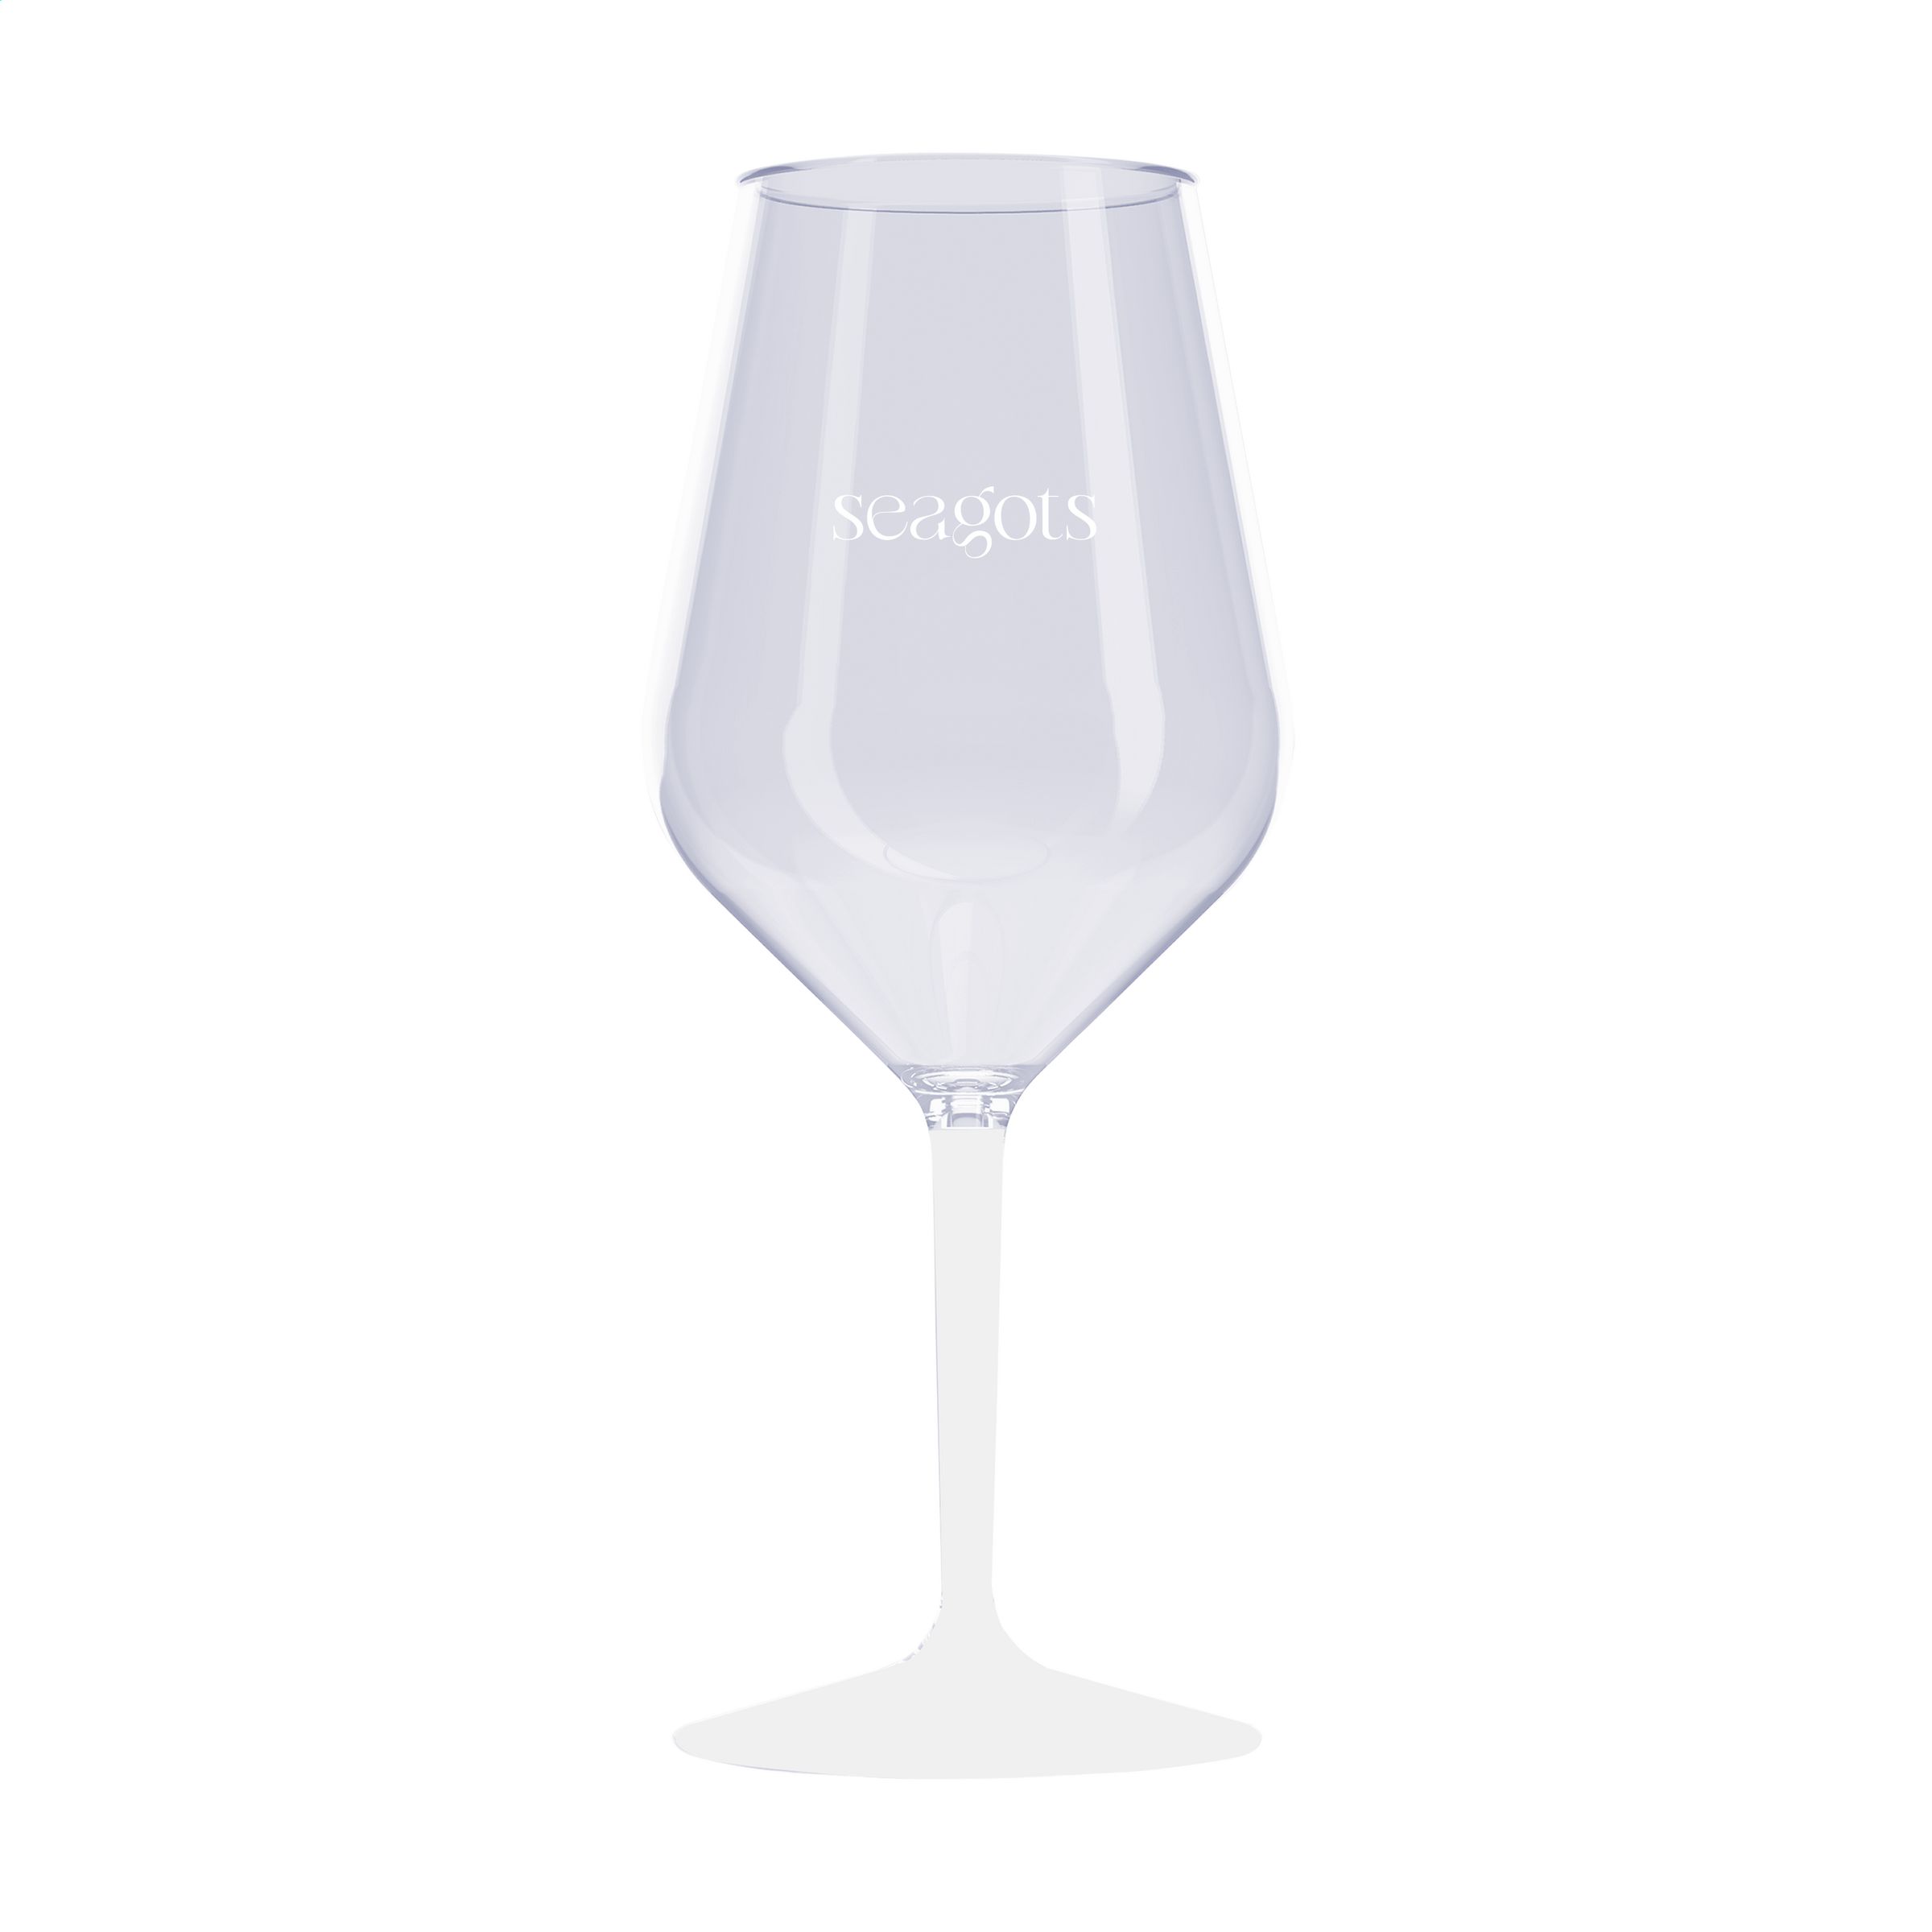 HappyGlass Unbreakable Wine Glass - Bourton-on-the-Water - Hutton